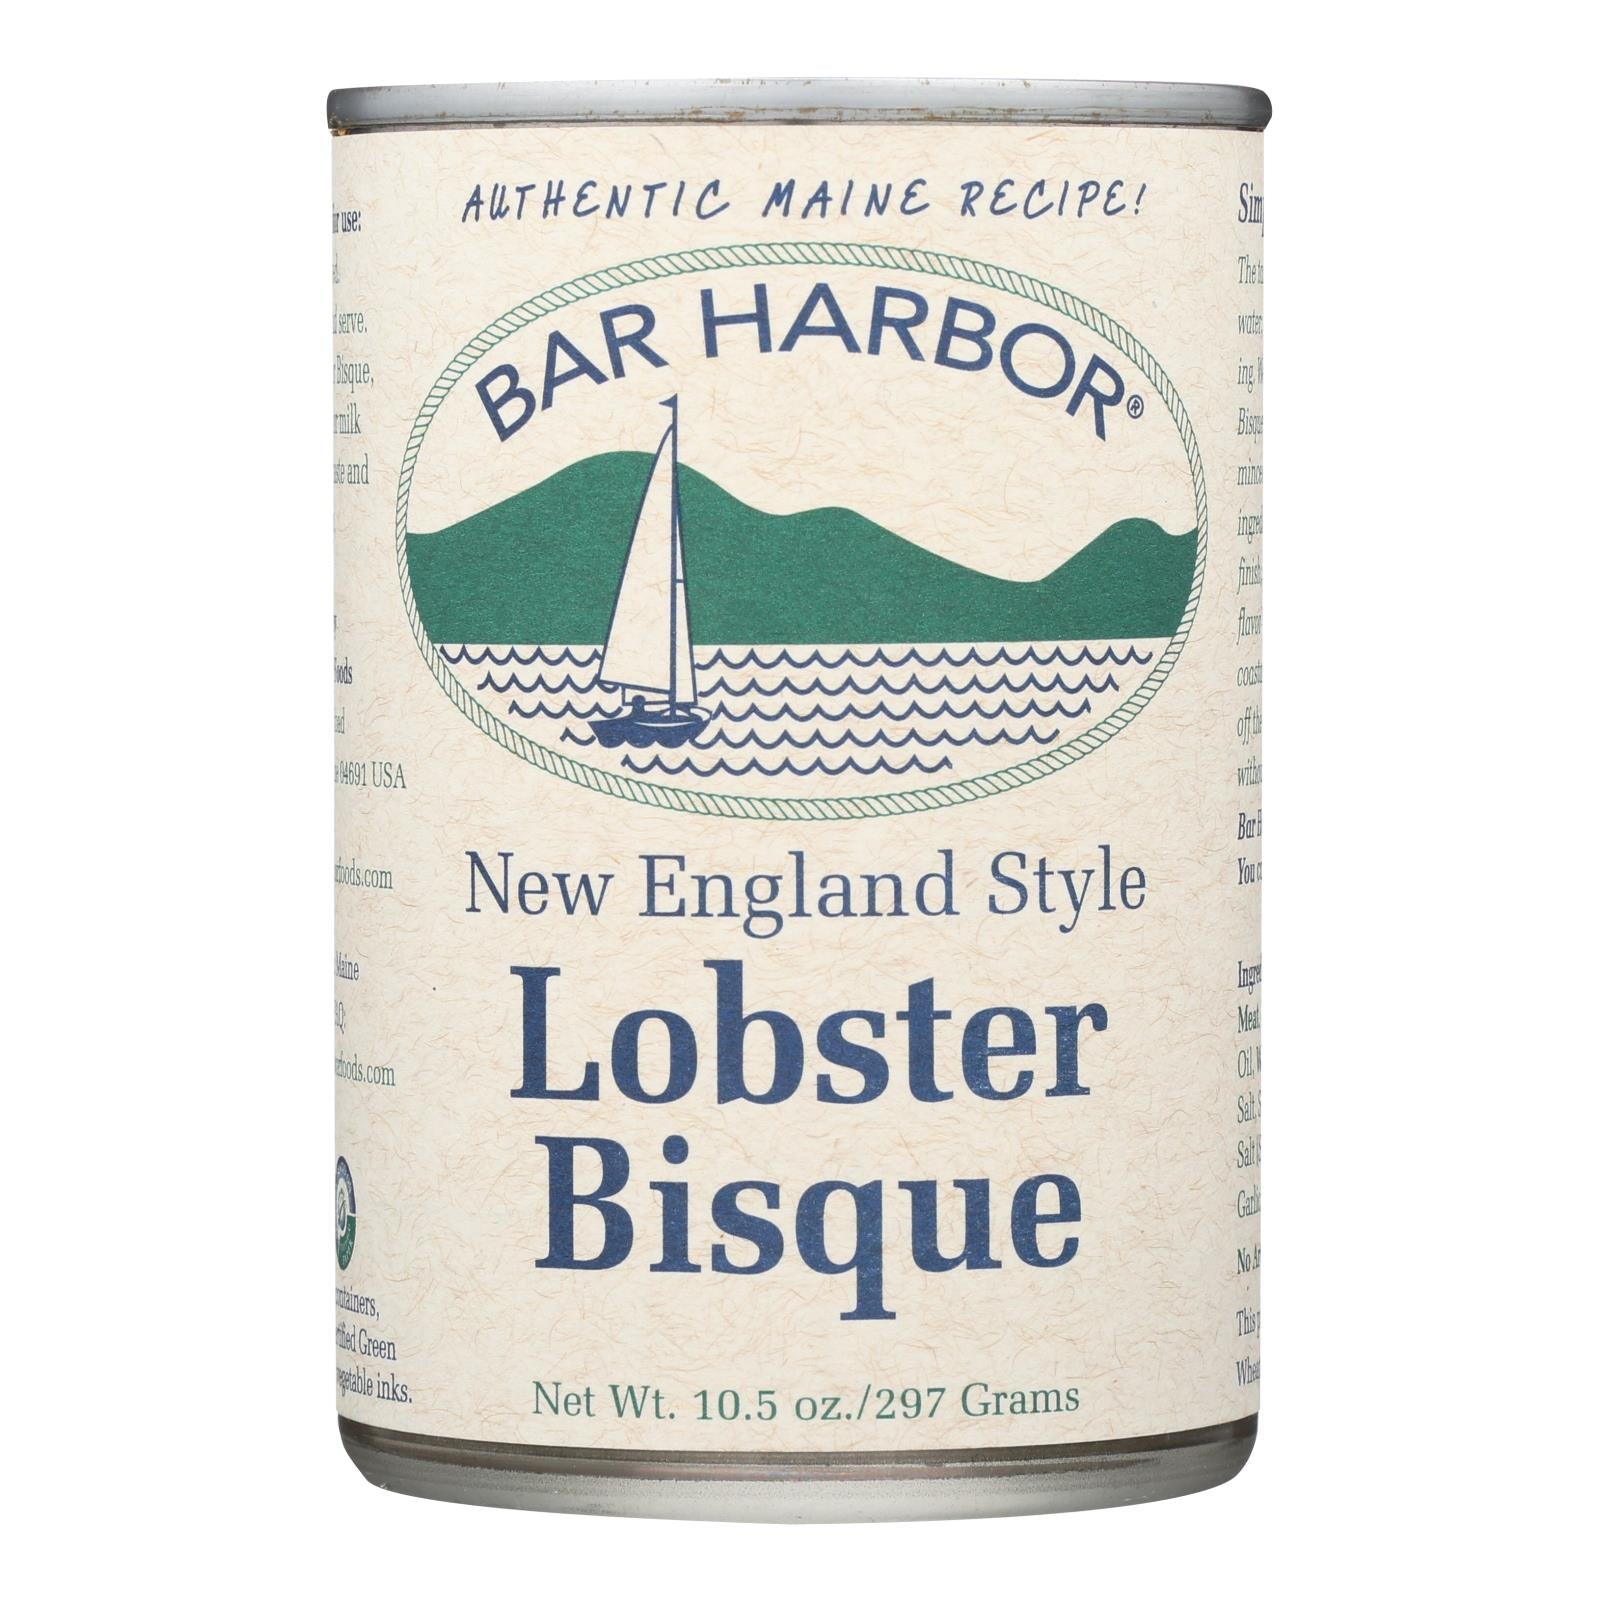 Bar Harbor, Bar Harbor - New England Style Lobster Bisque - Case of 6 - 10.5 oz. (Pack of 6)